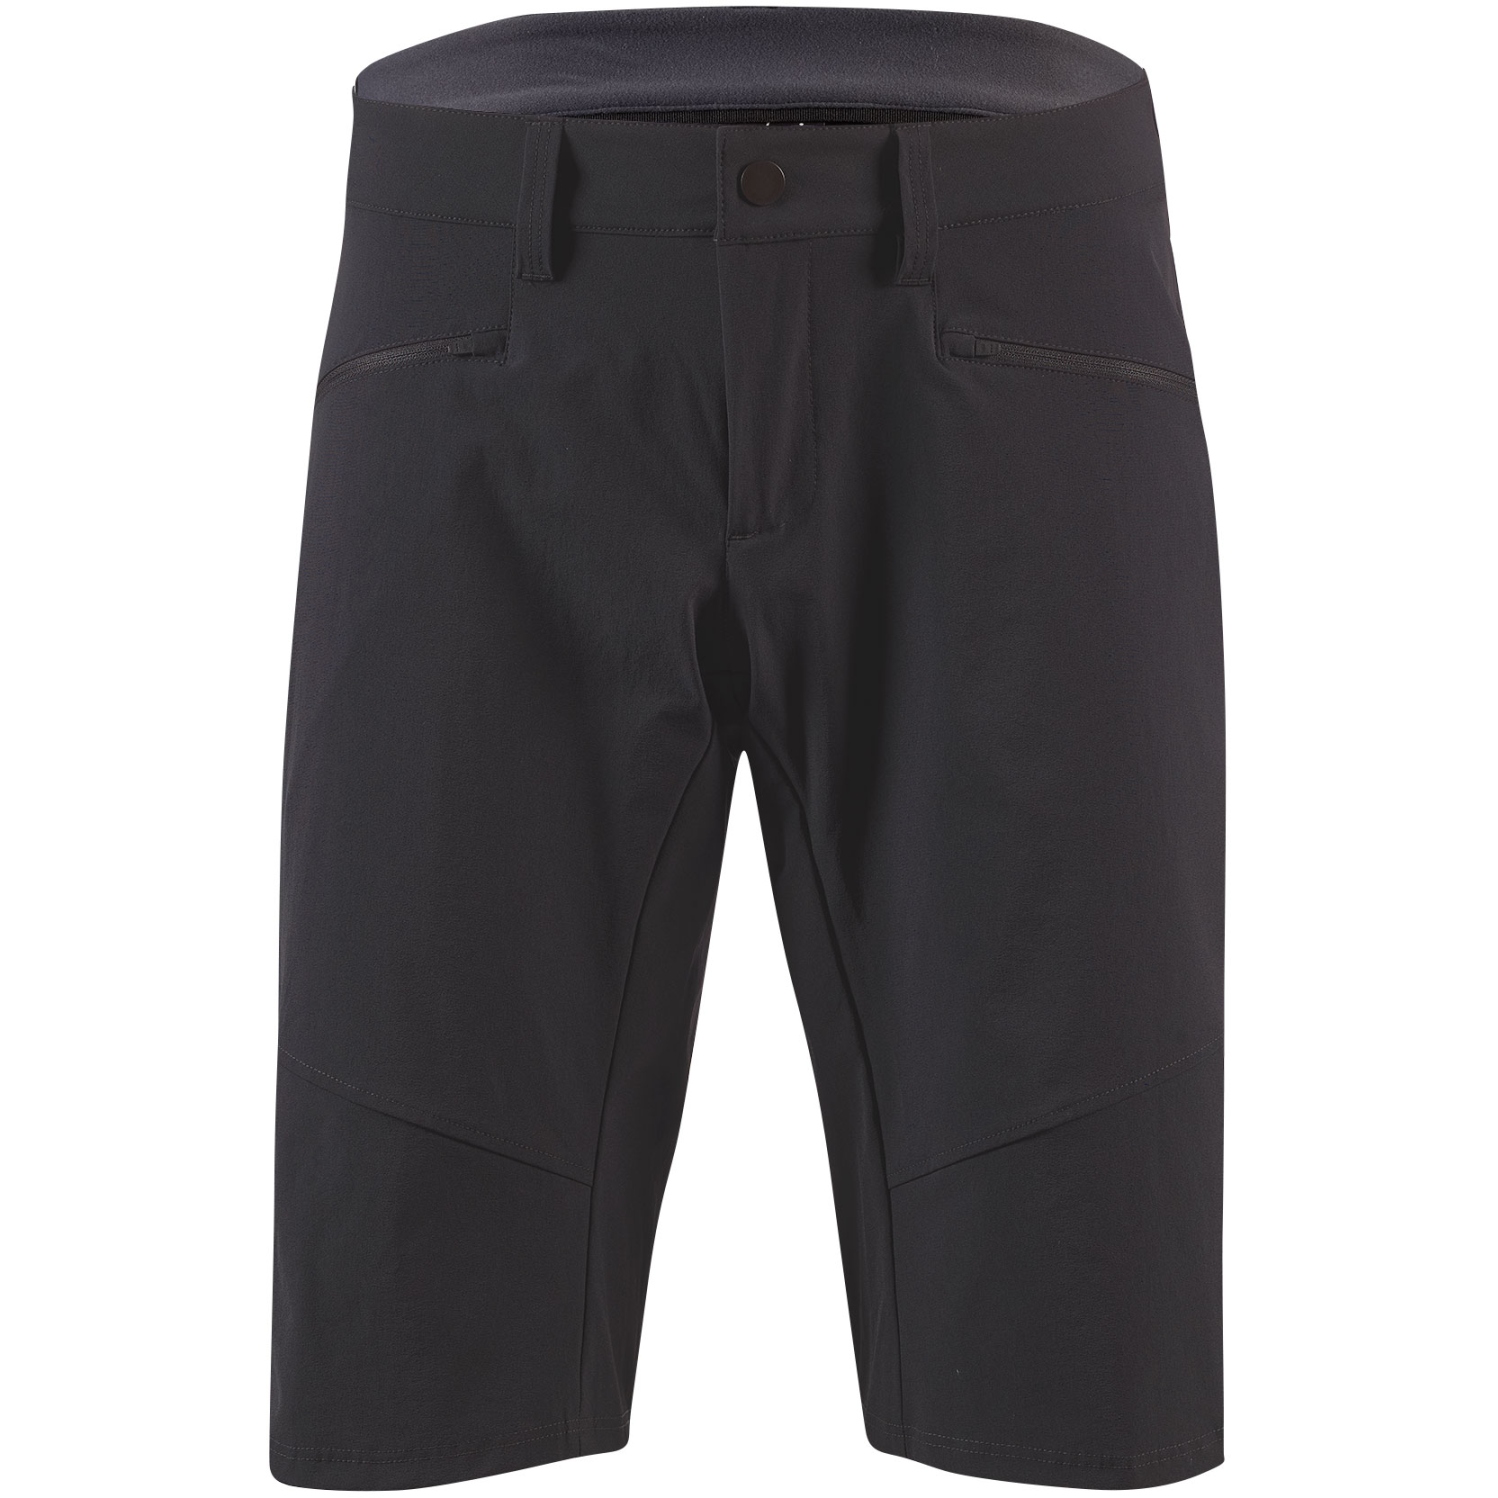 Image of Velocio Men's Trail Access Shorts - Charcoal